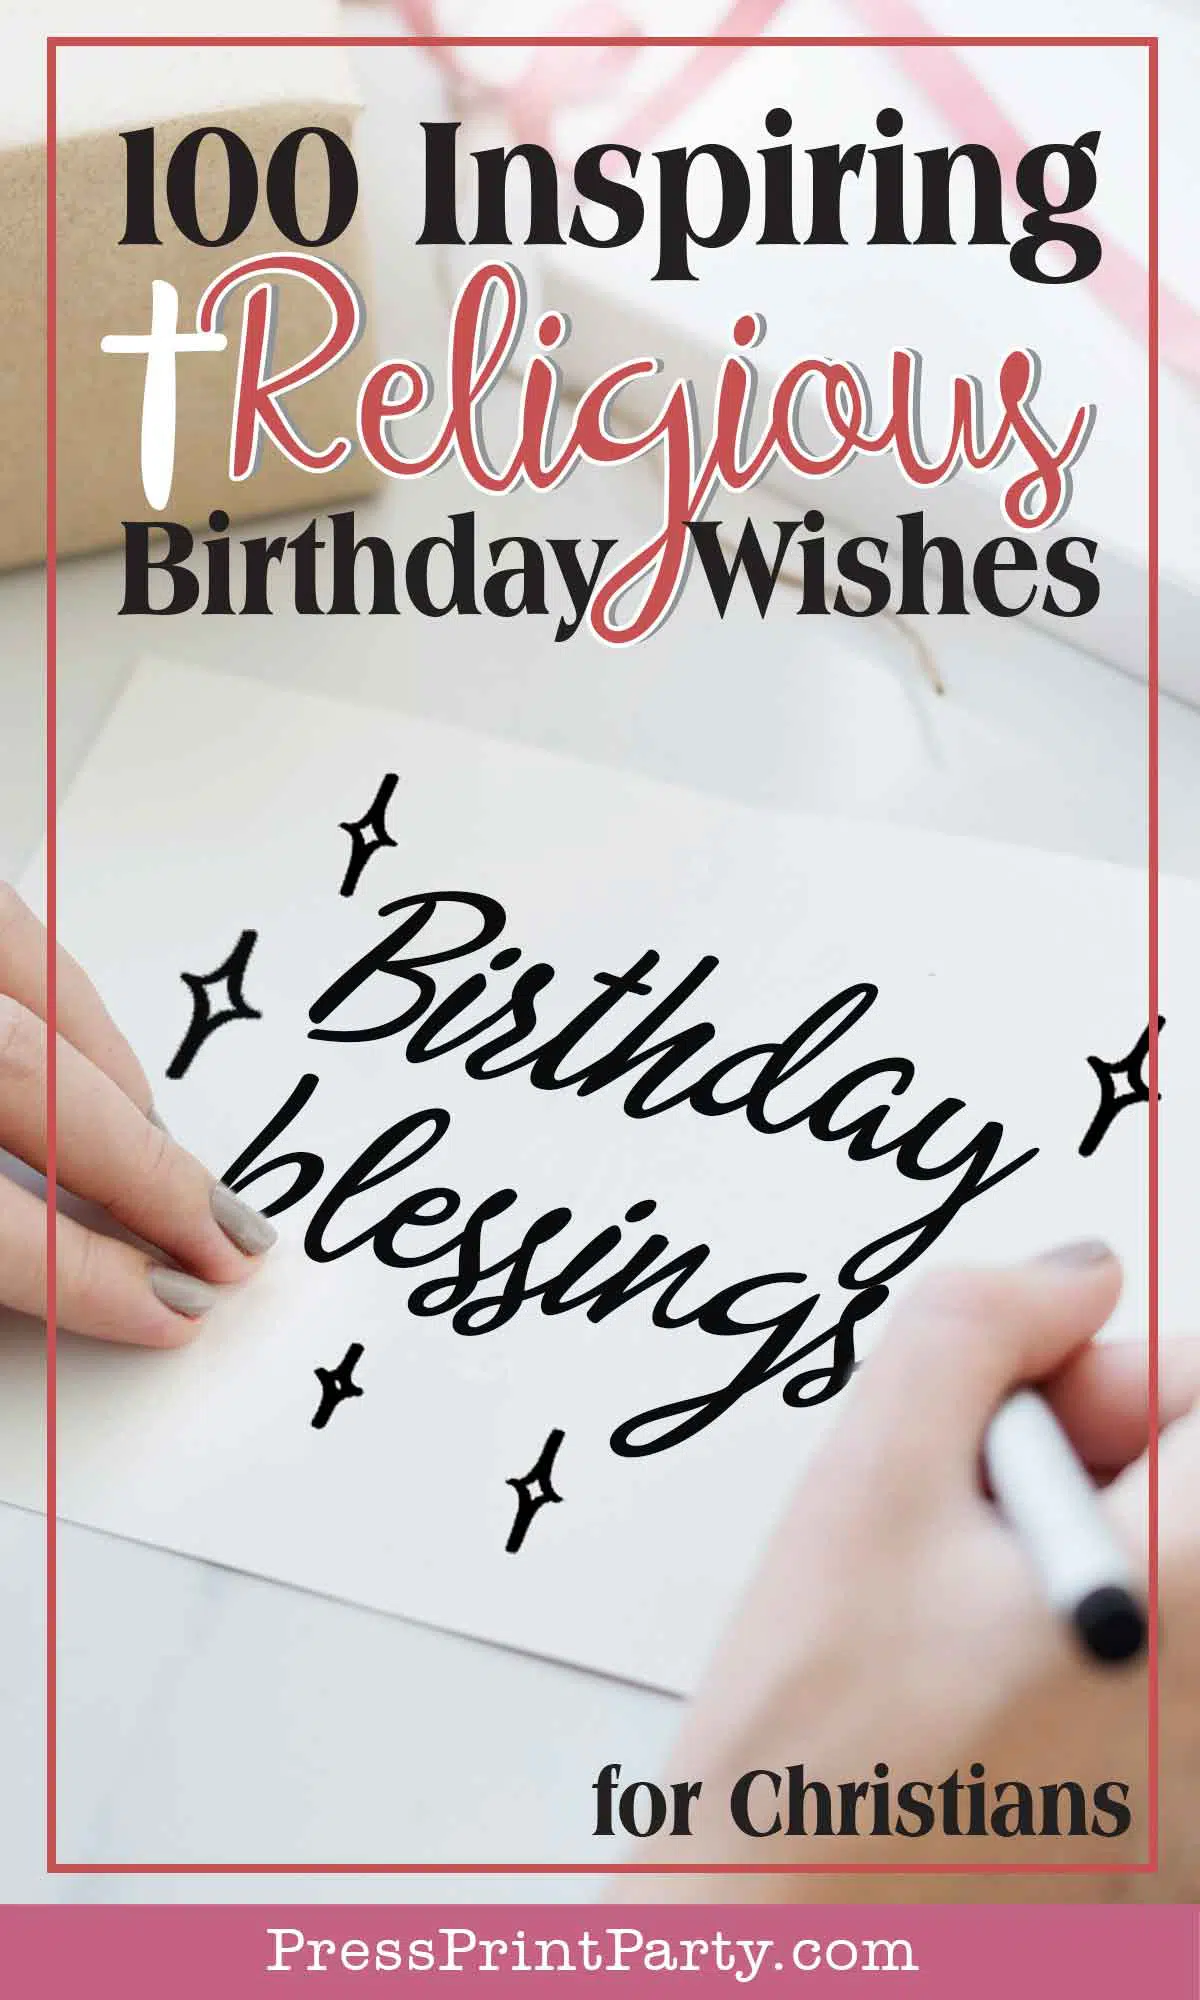 70+ Inspiring Religious Birthday Wishes and Blessings